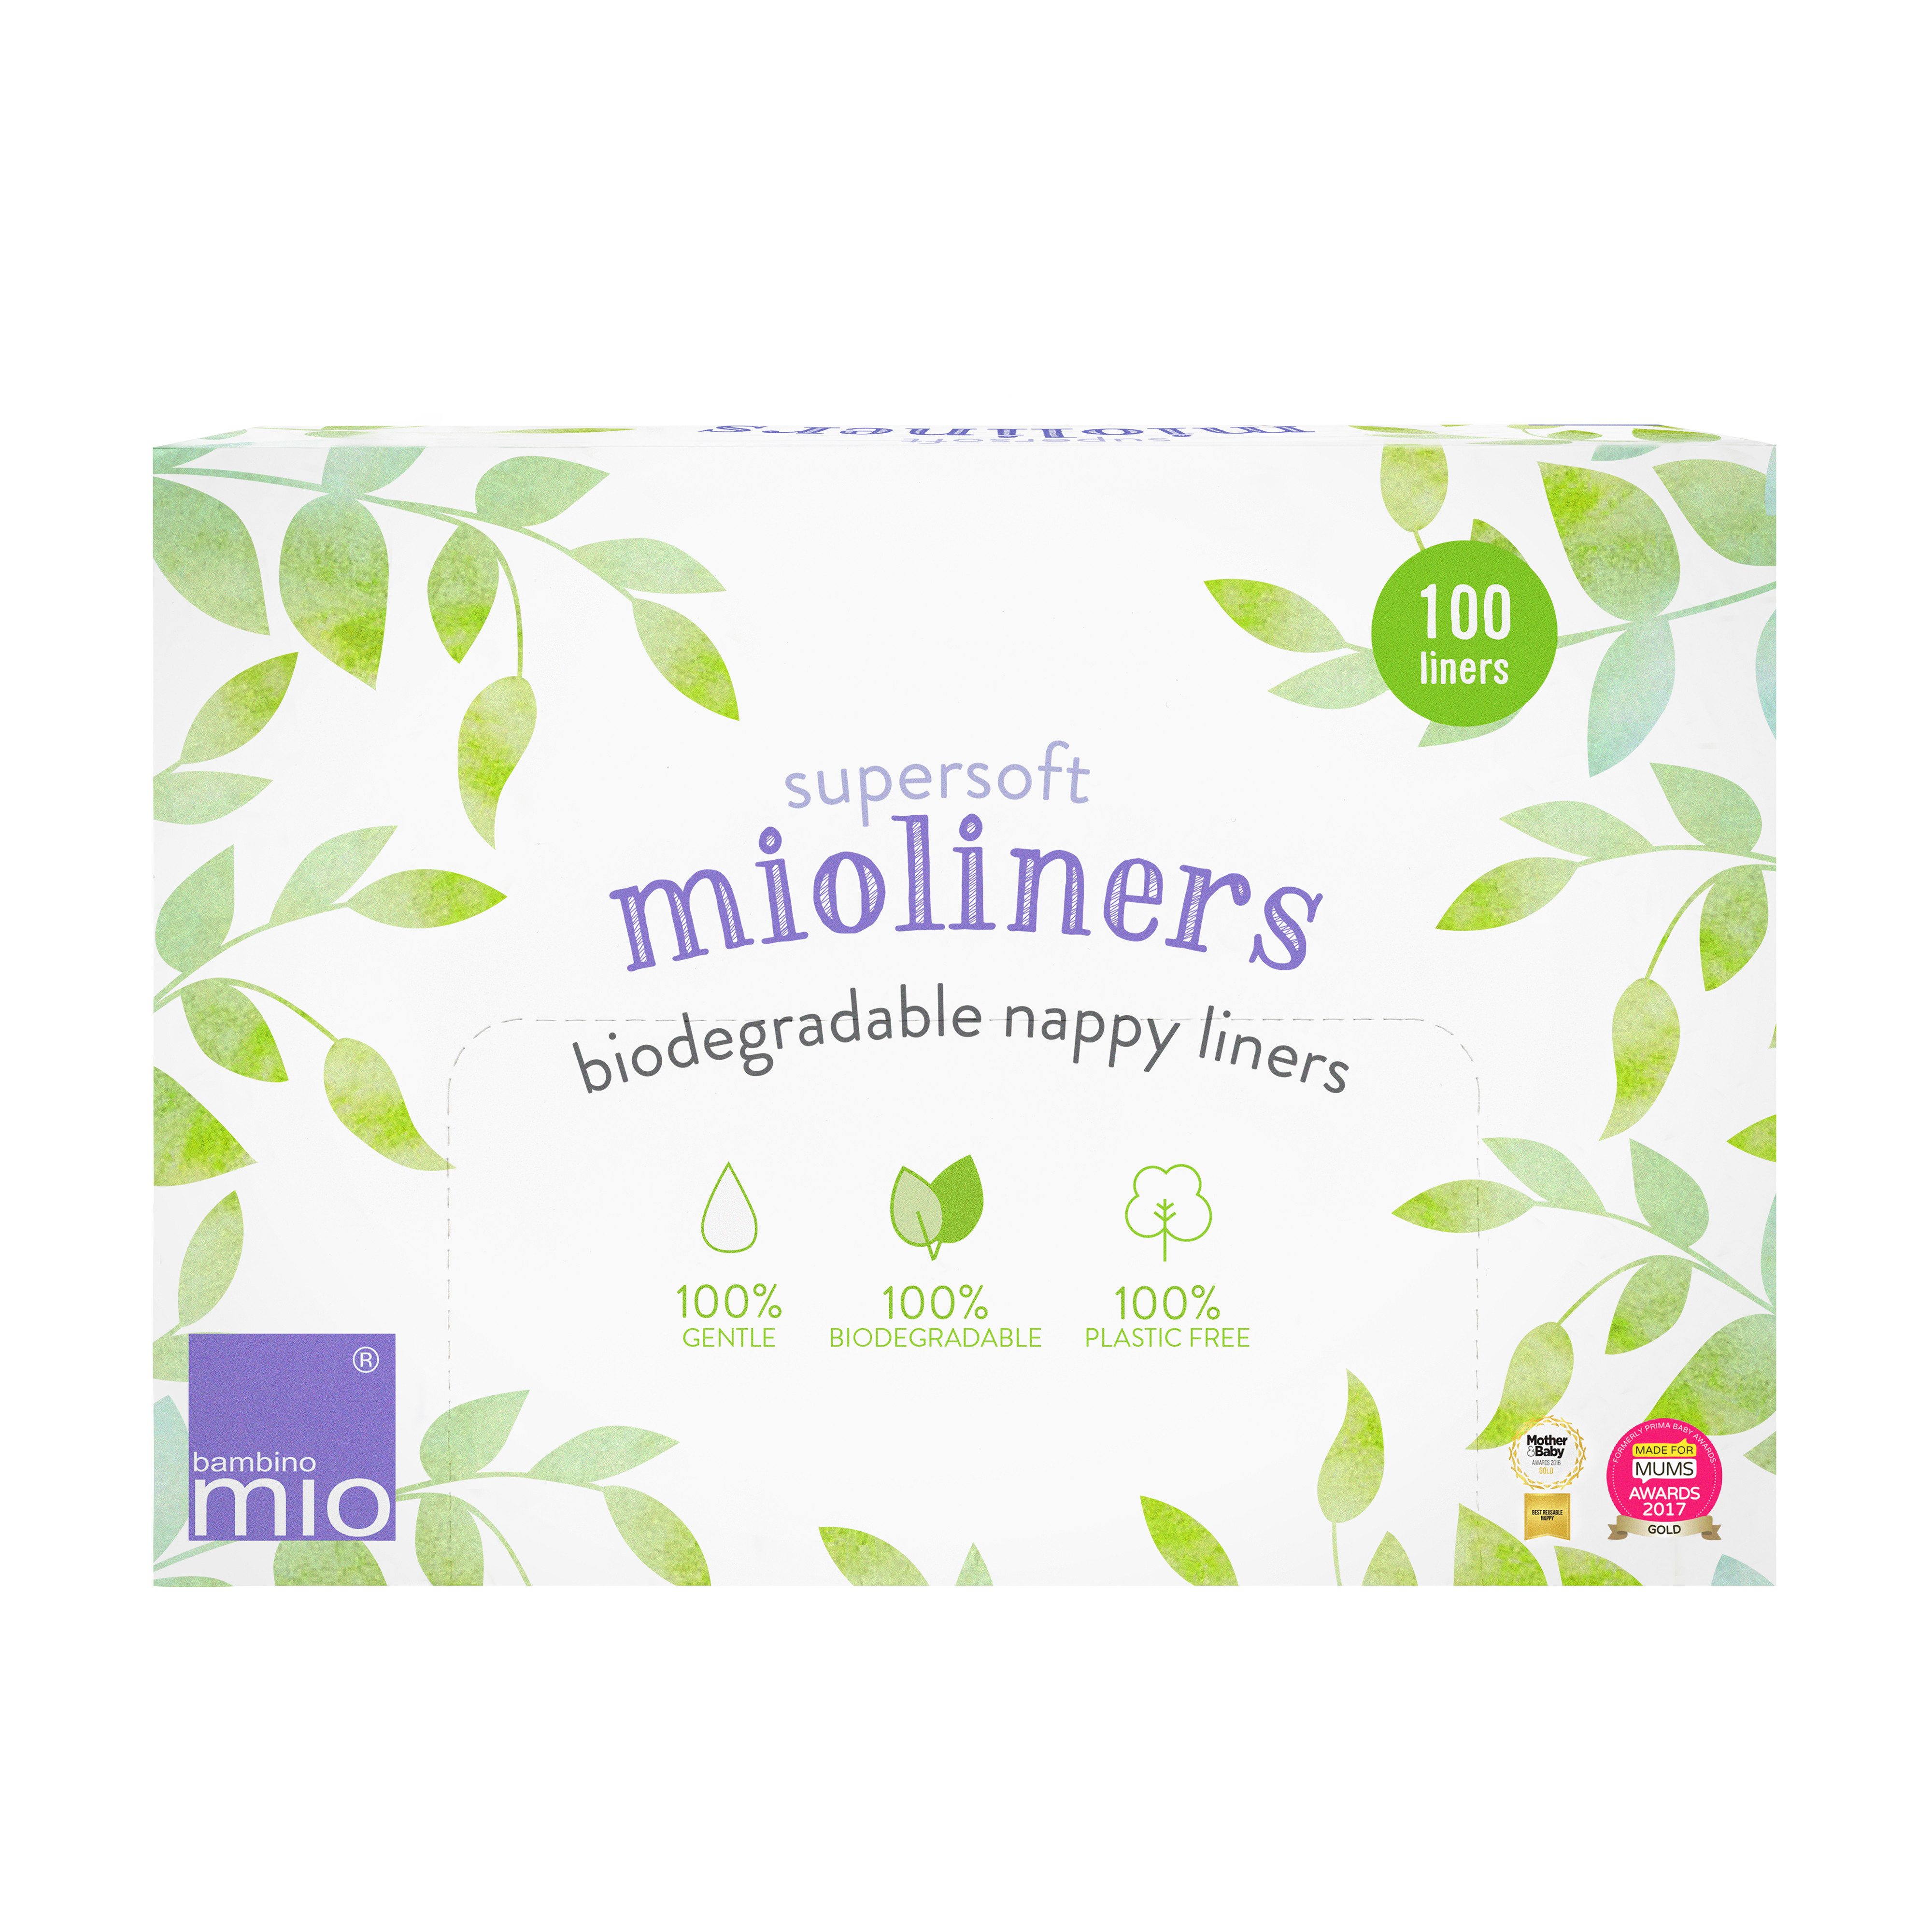 mioliners Biodegradable Nappy Liners Bambino Mio 2 Pack 